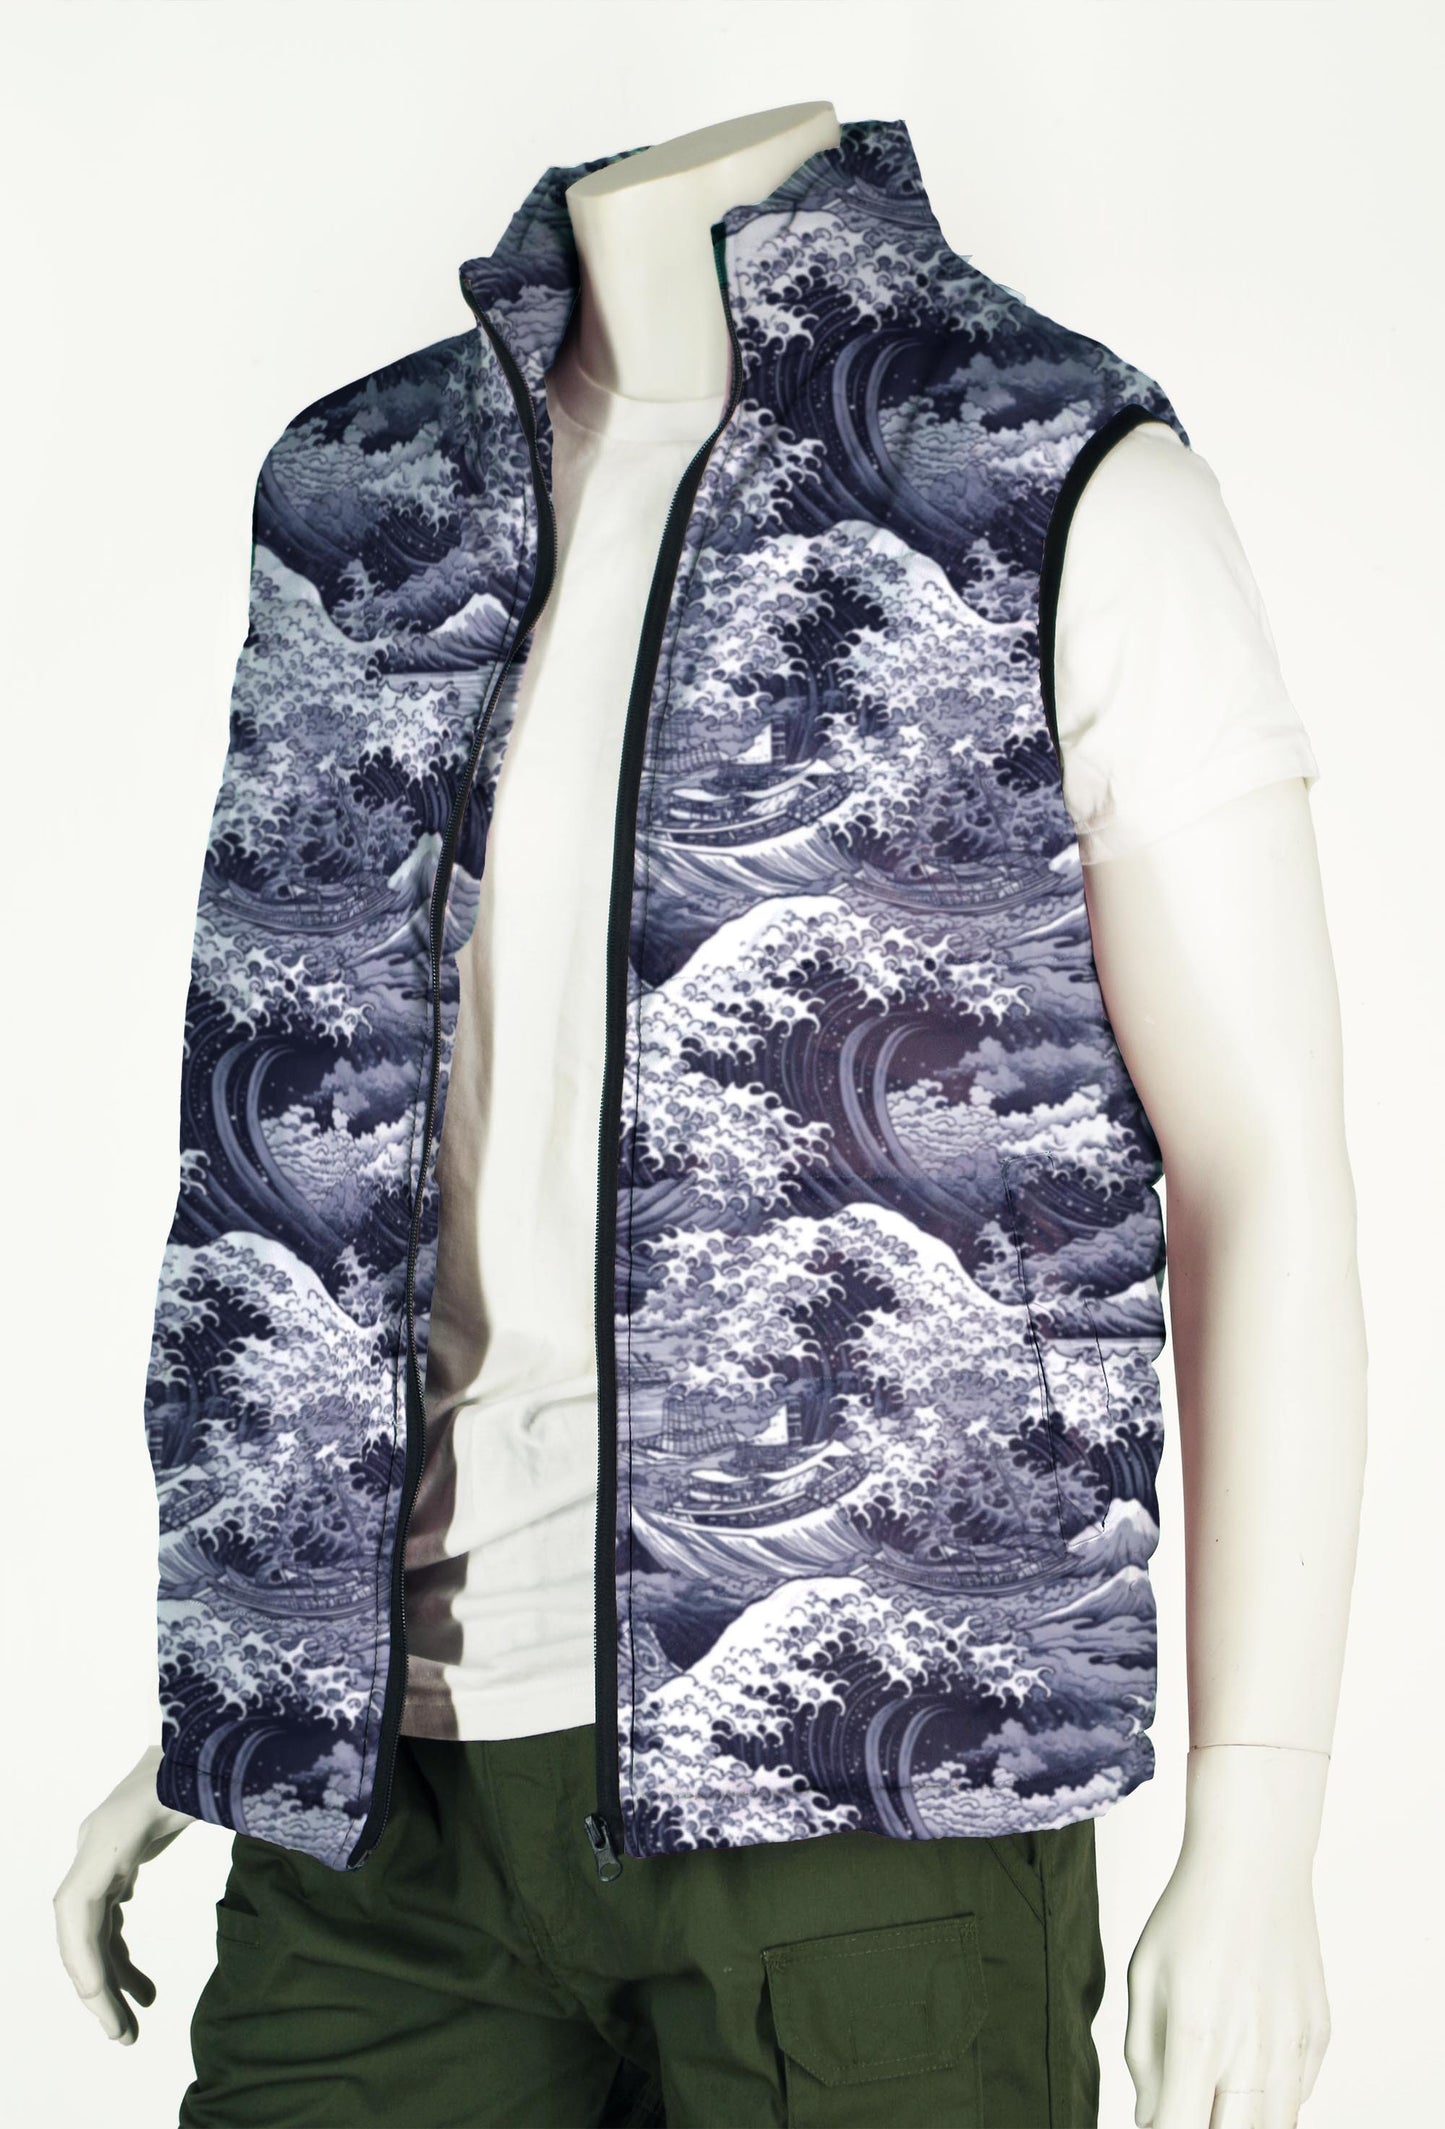 Puffer Vest Mens with Great Wave Toile De Jouy Print